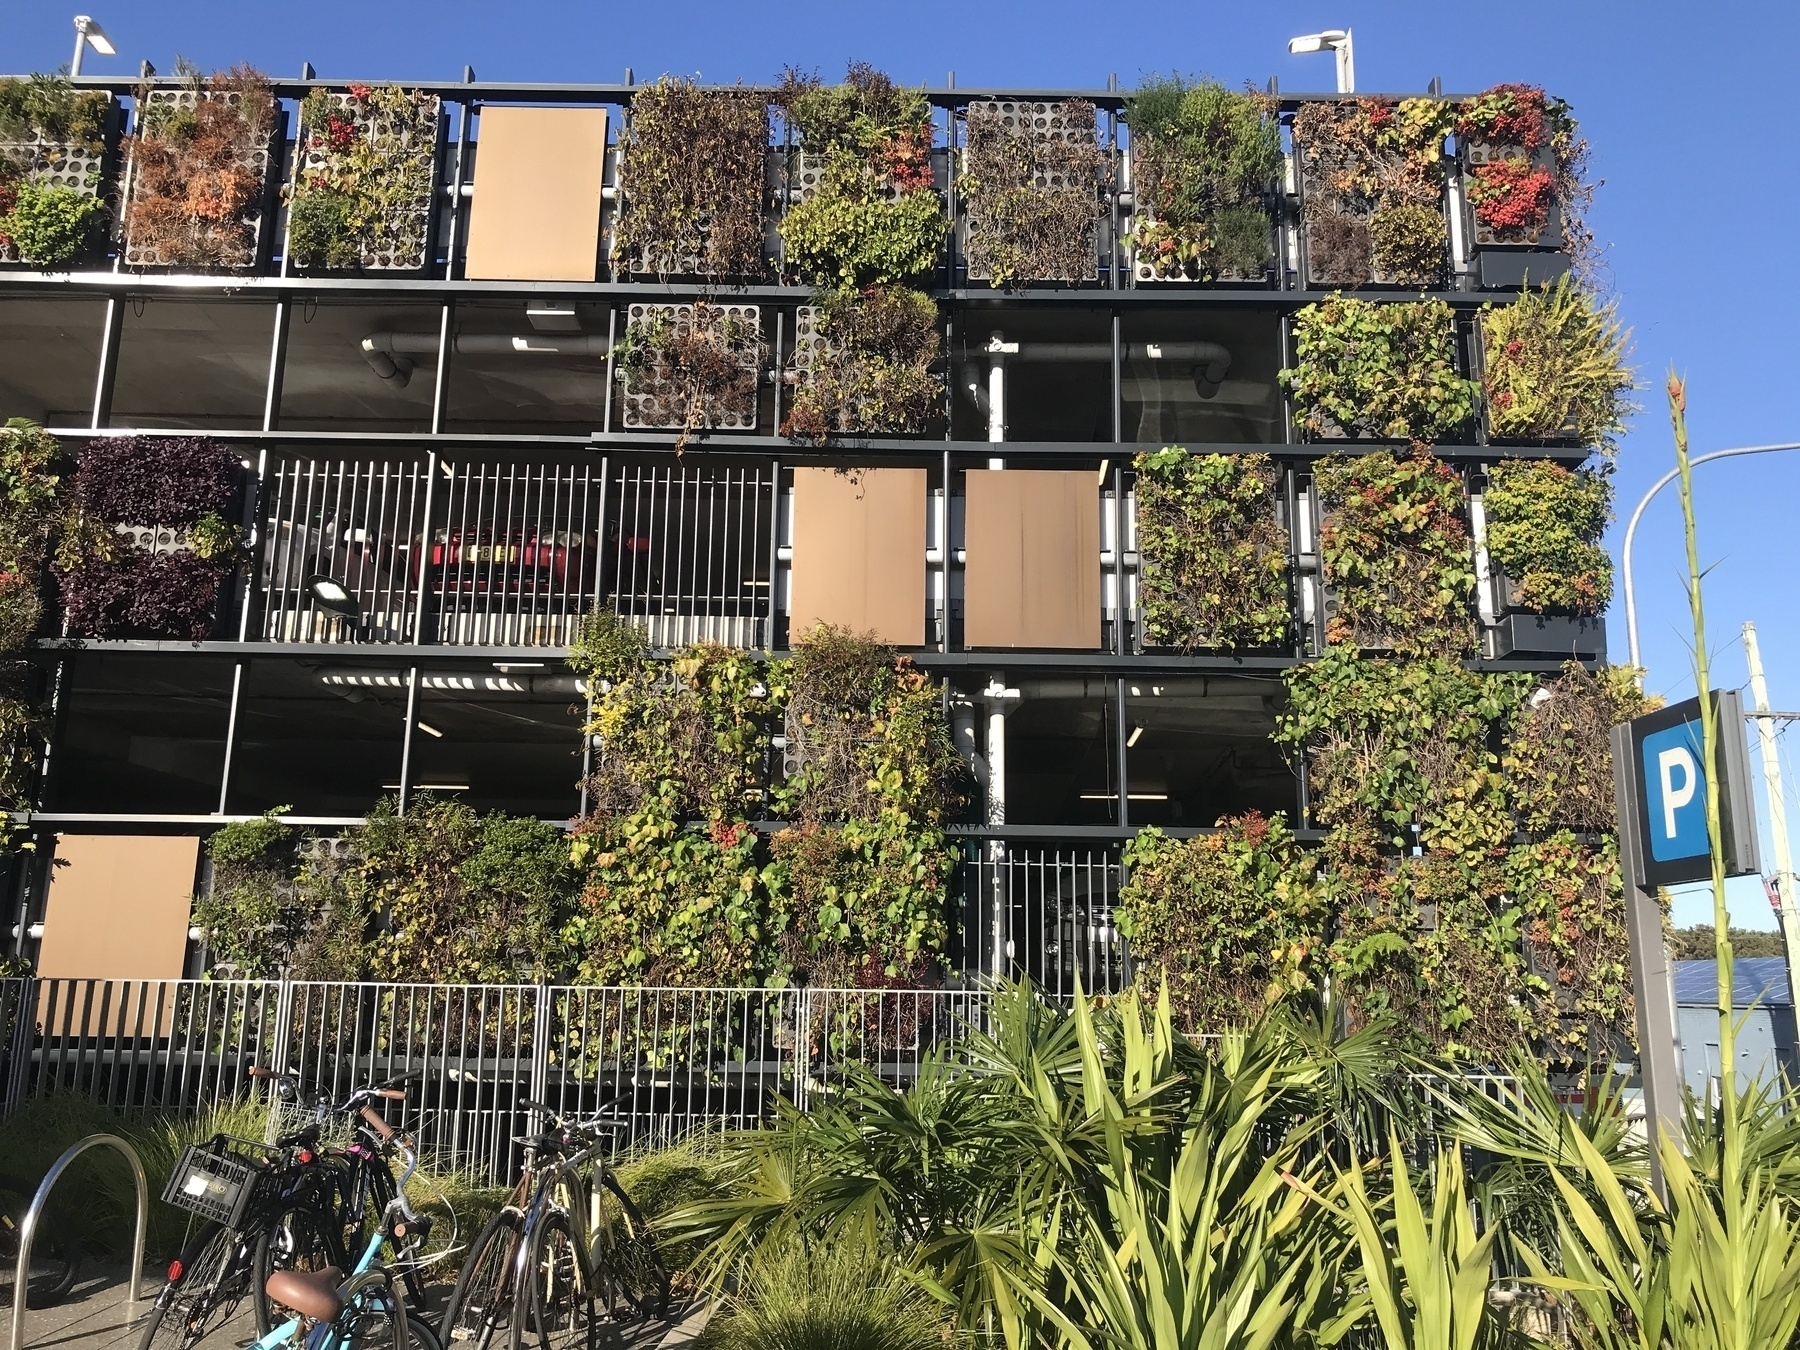 Part of the front of a three-storey carpark seen from the footpath. The carpark’s facade is composed of squares and rectangles, two levels per storey. Some are open to reveal the interior. Some are enclosed by vertical rails, some by solid panels, and many others by thriving plants grown in the holes of concret panels or in tiered garden  boxes. On the path is front of the carpark is more greenery and a bicycle parking space.